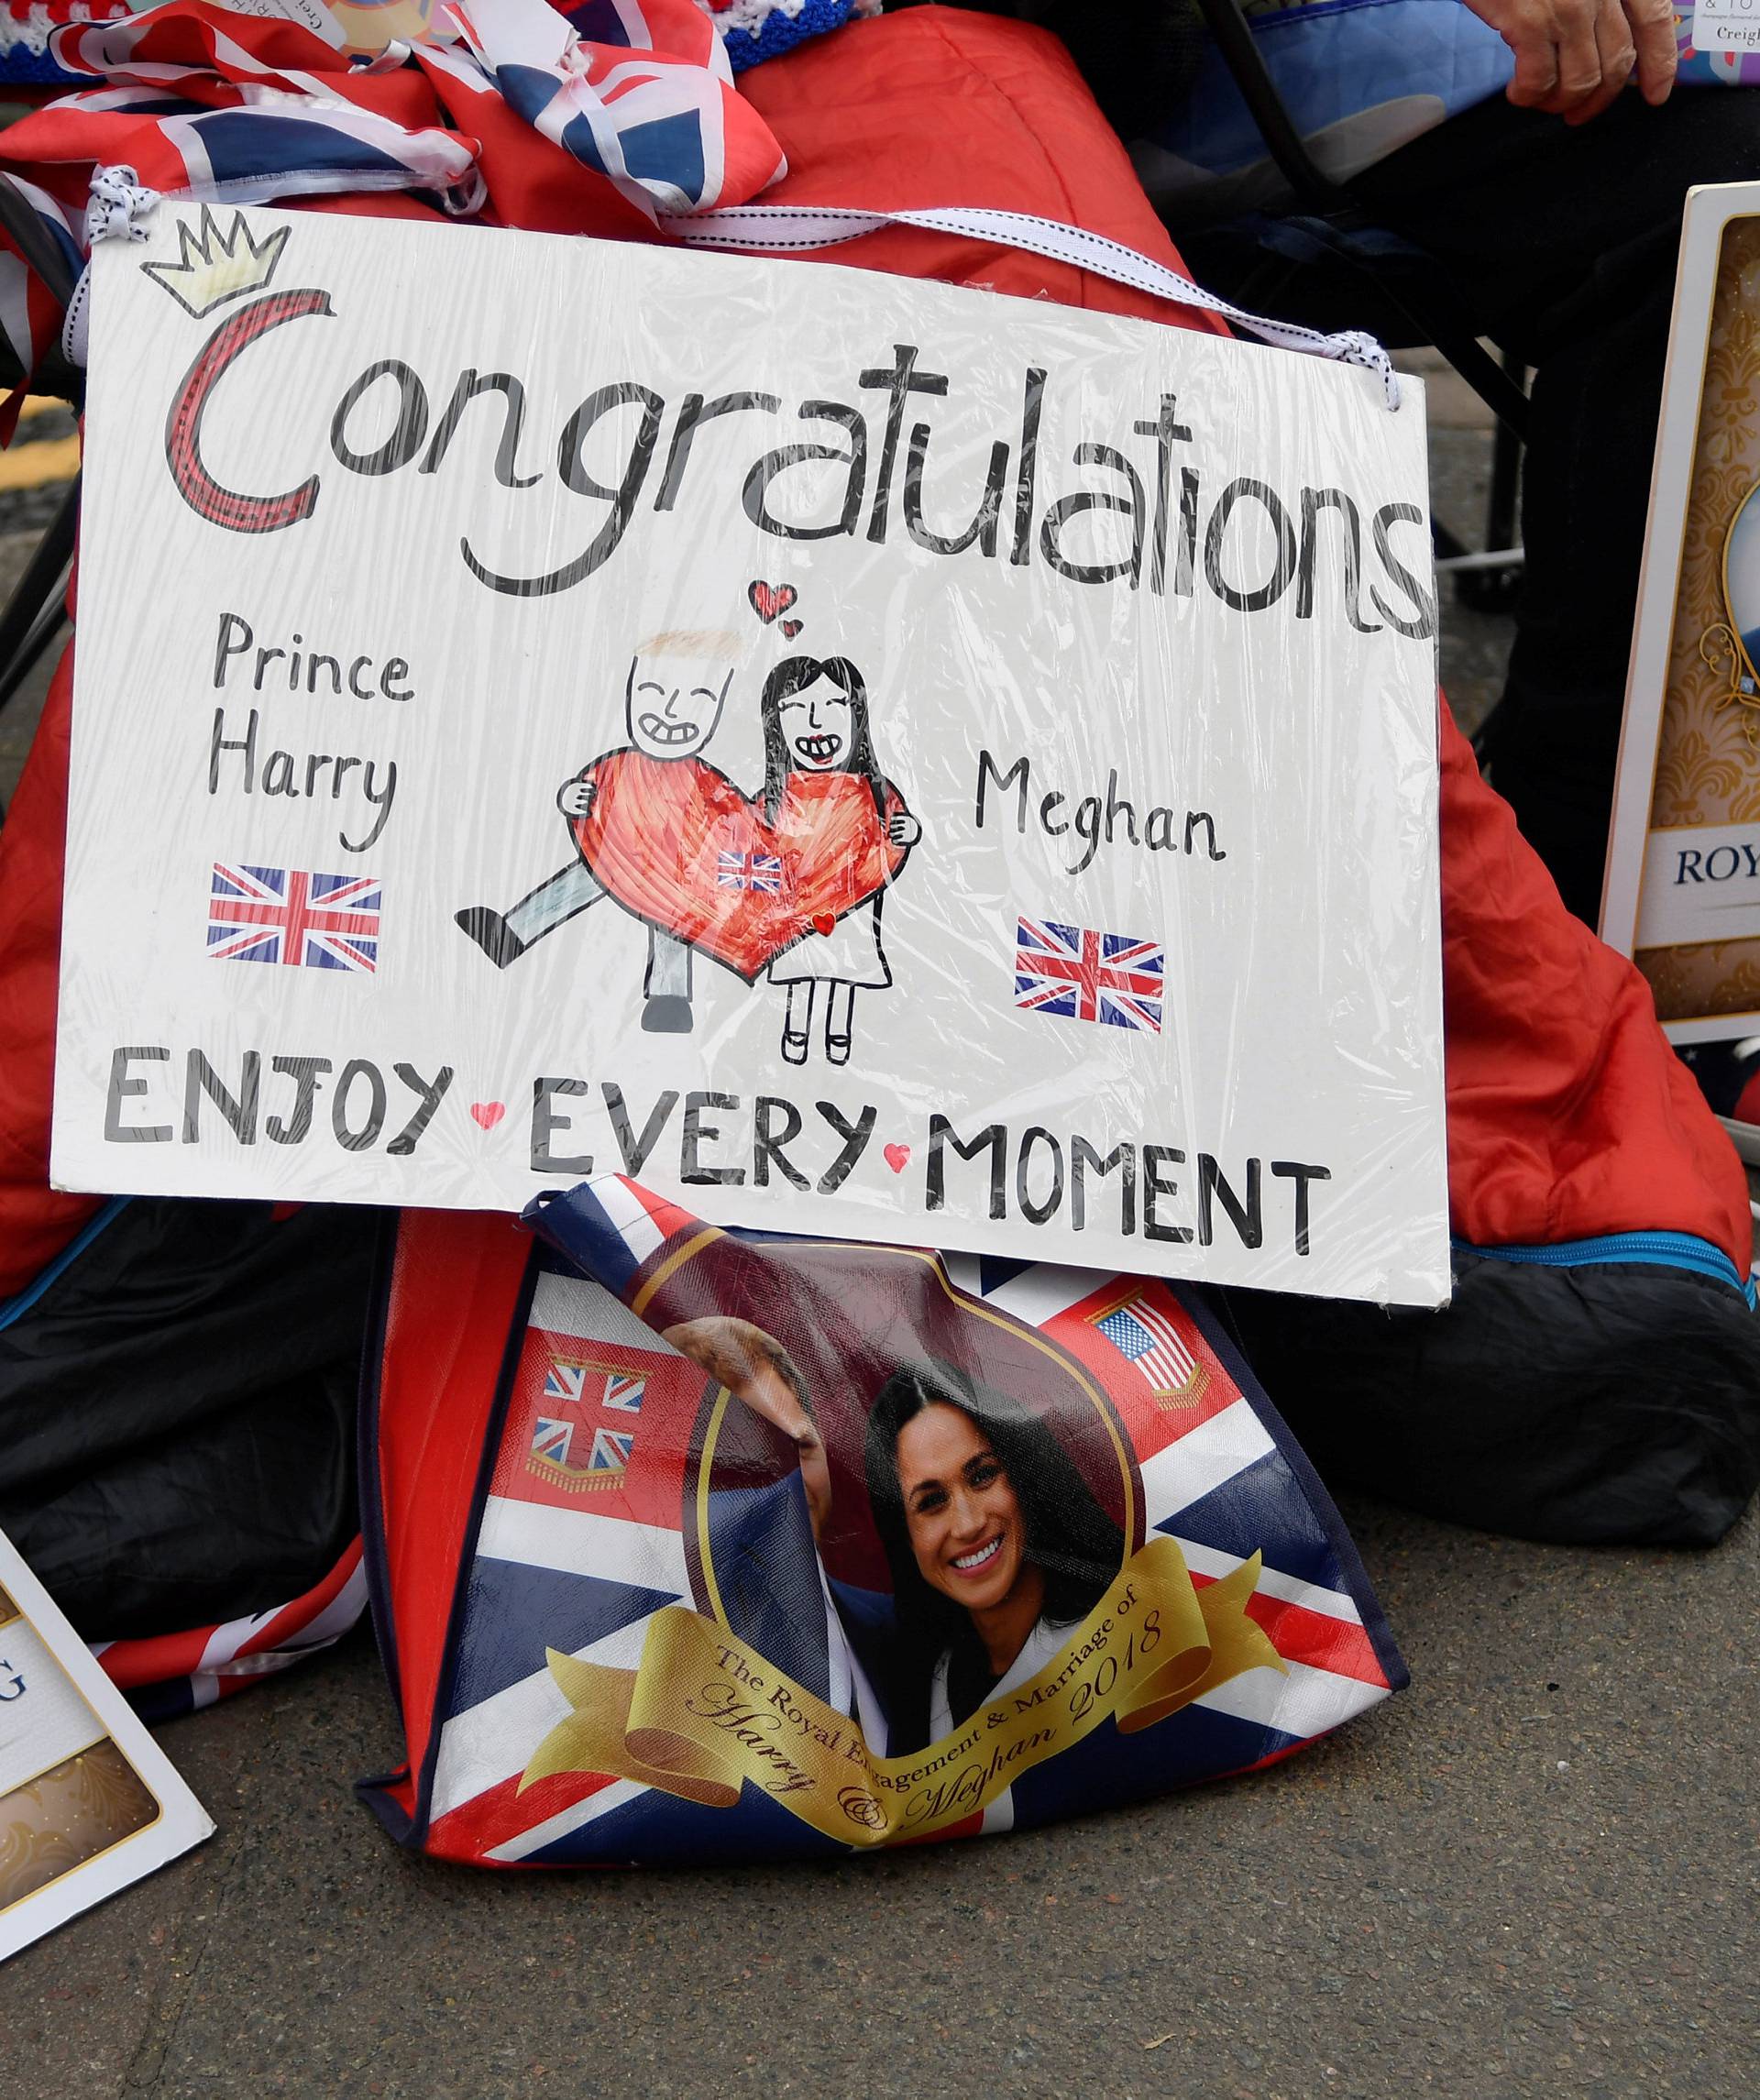 Goodwill messages are seen beside royal fans outside of  Windsor Castle, the location for the forthcoming wedding of Britain's Prince Harry and his fiancee Meghan Markle, in Windsor, Britain